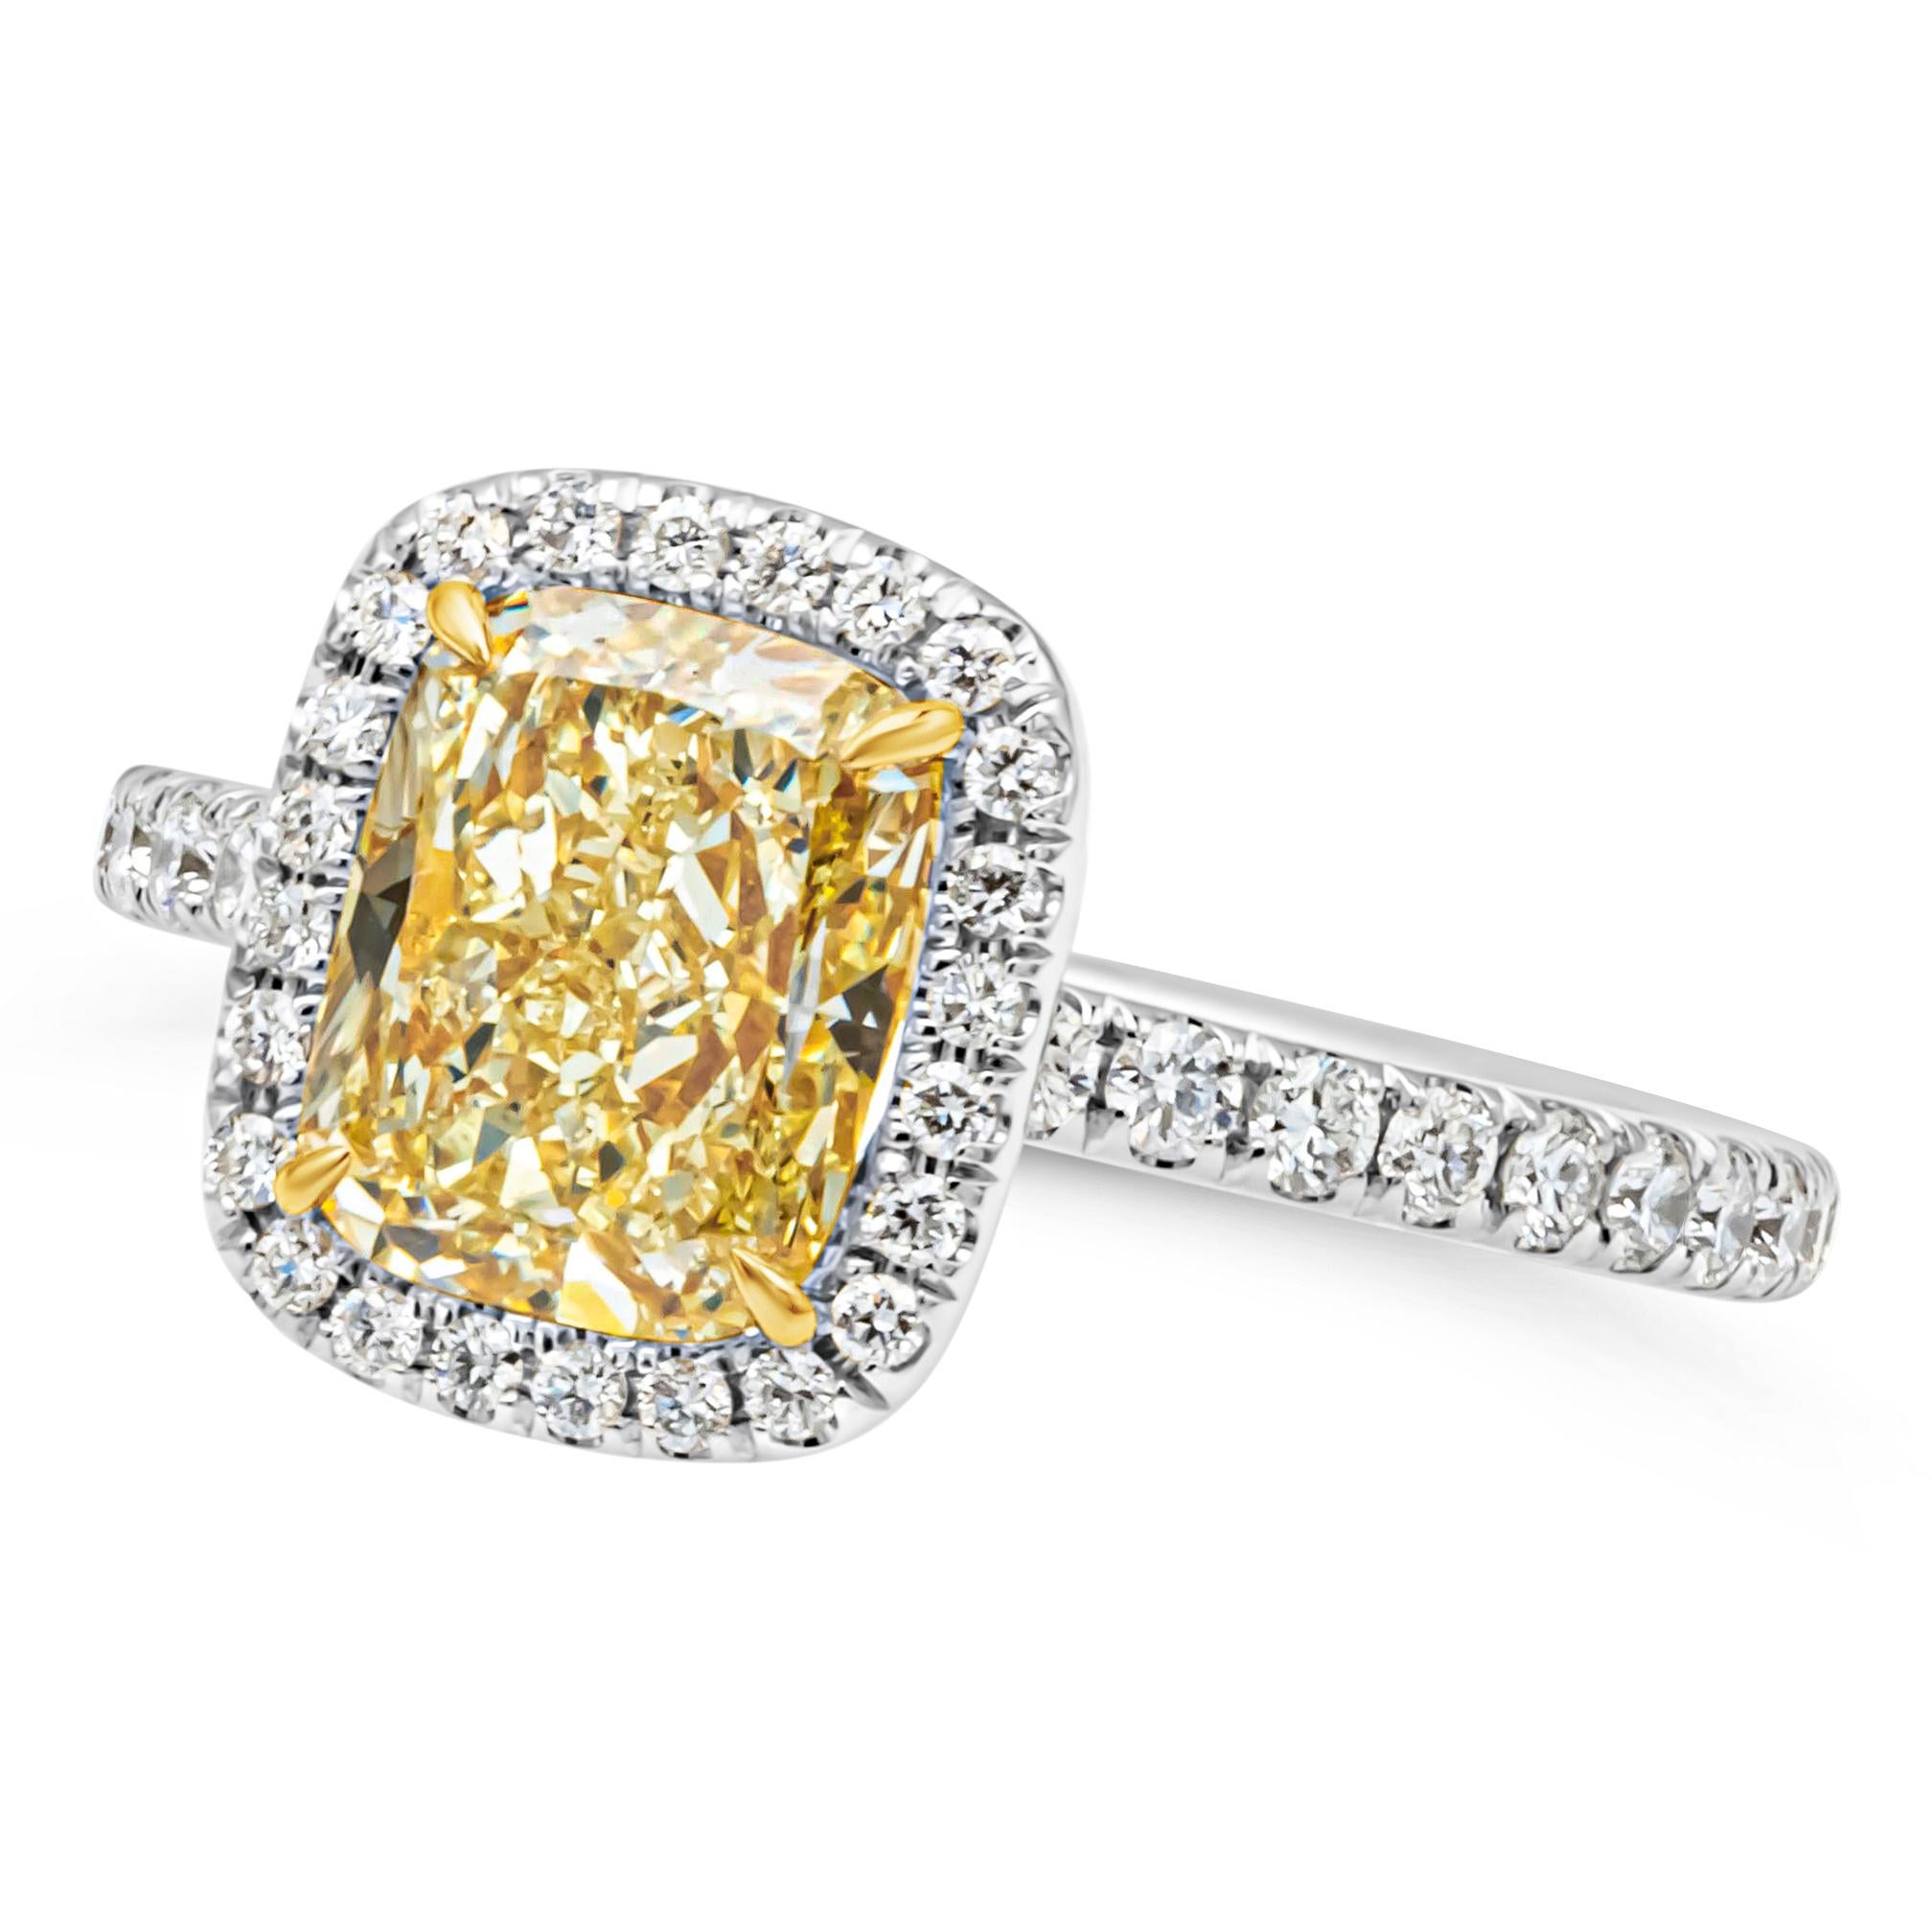 This gorgeous halo engagement ring features a 2.03 carats elongated cushion cut diamond certified by GIA as fancy yellow color and VS2 in clarity. Surrounded by brilliant round diamonds that continue to the shank of the ring weighing 0.66 carats